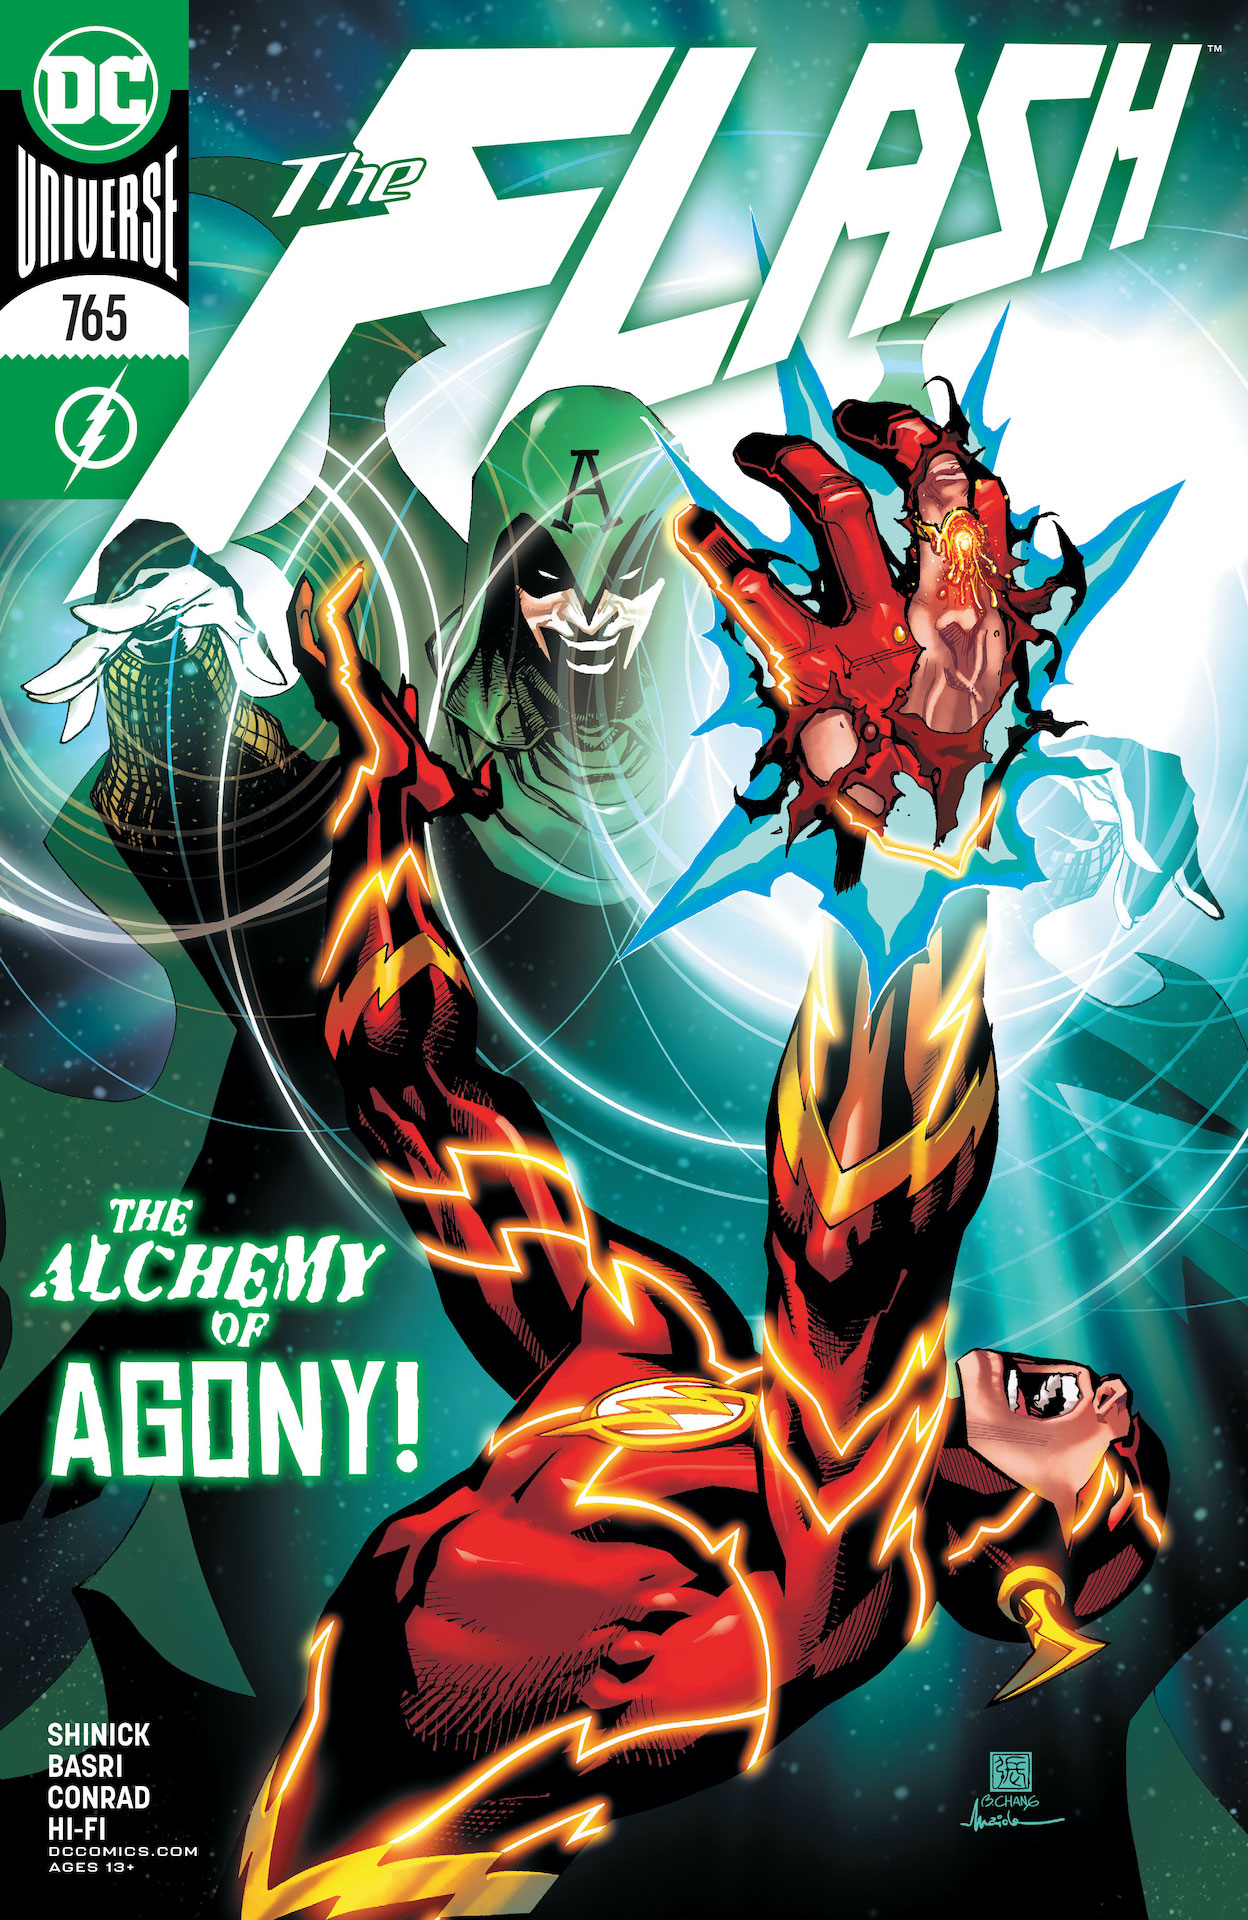 DC Preview: The Flash #765